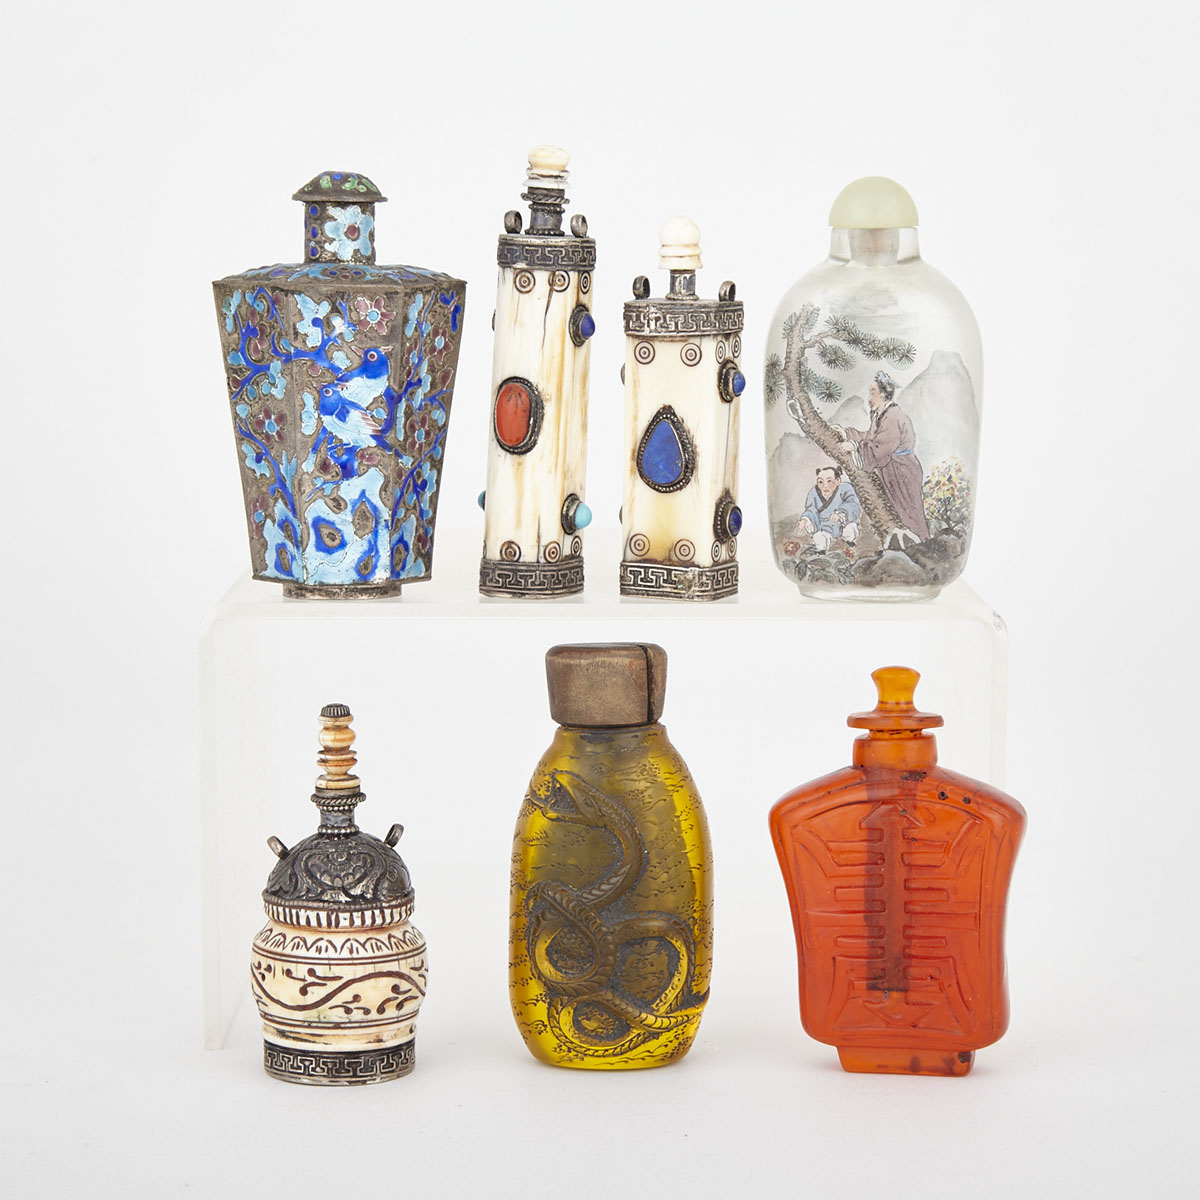 A Group of Seven Snuff Bottles, Early 20th Century